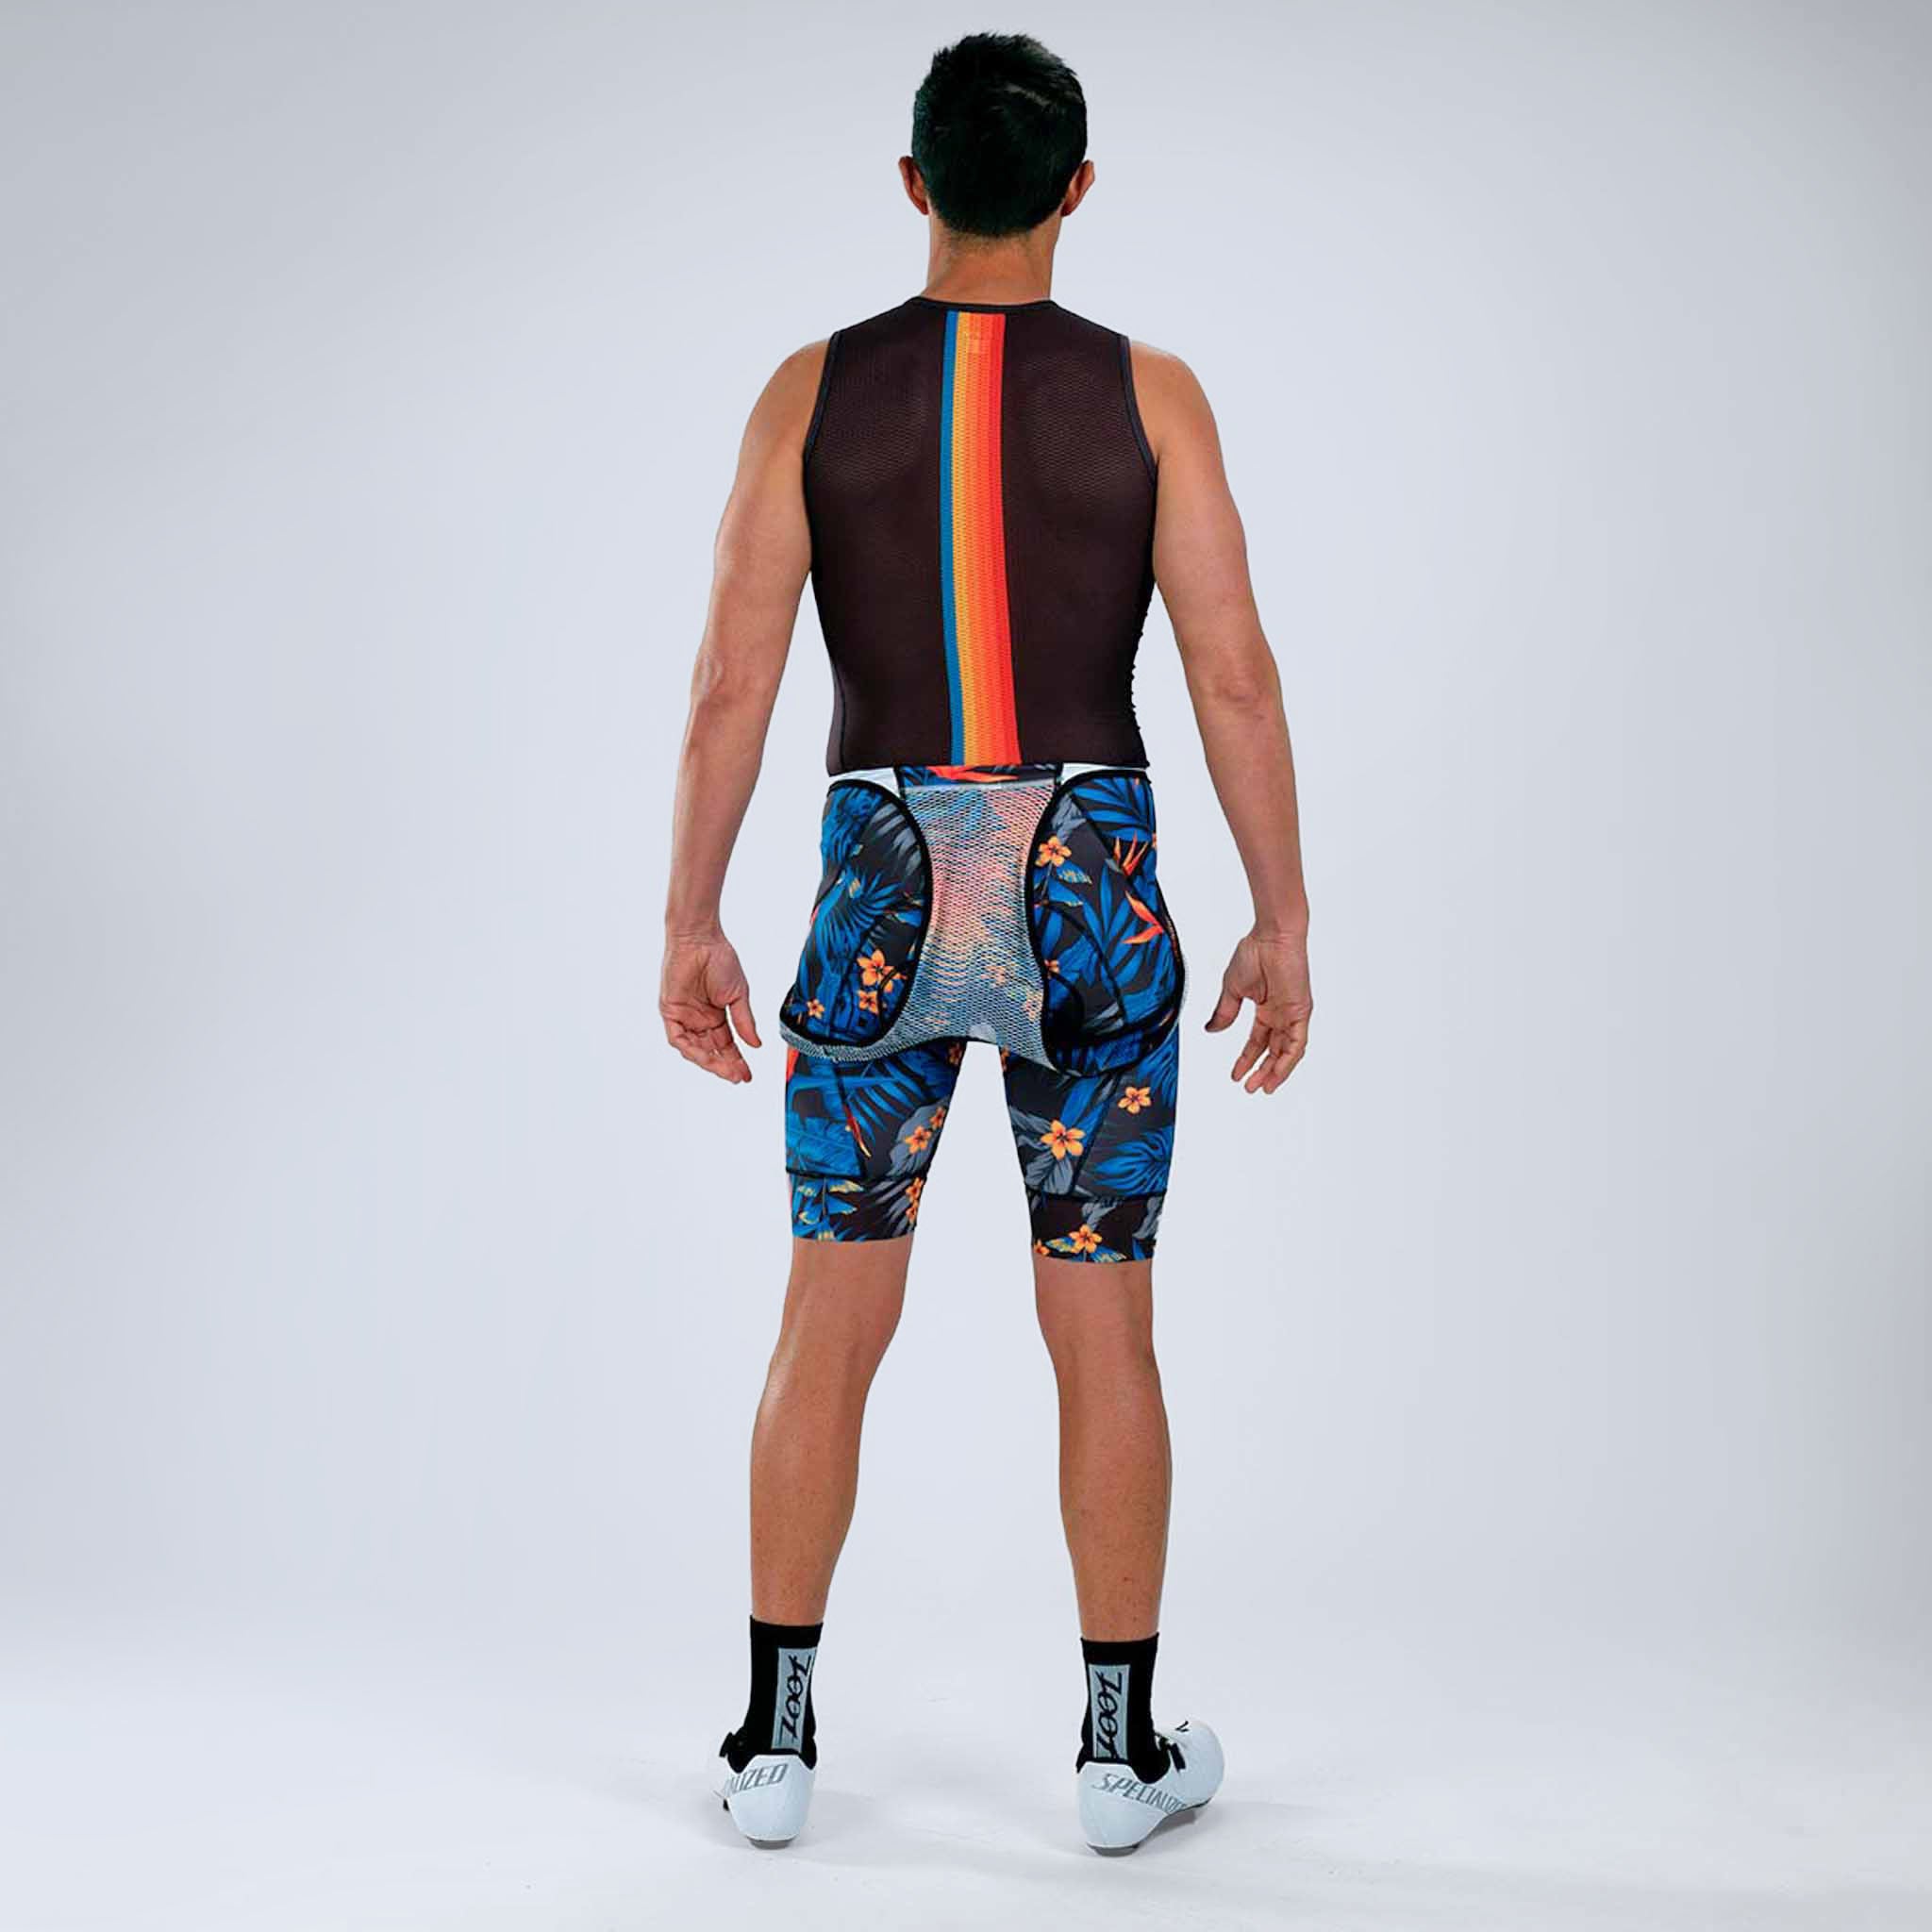 Zoot Sports CYCLE BASE LAYERS Men's LTD Cycle Base Layer - 40 Years